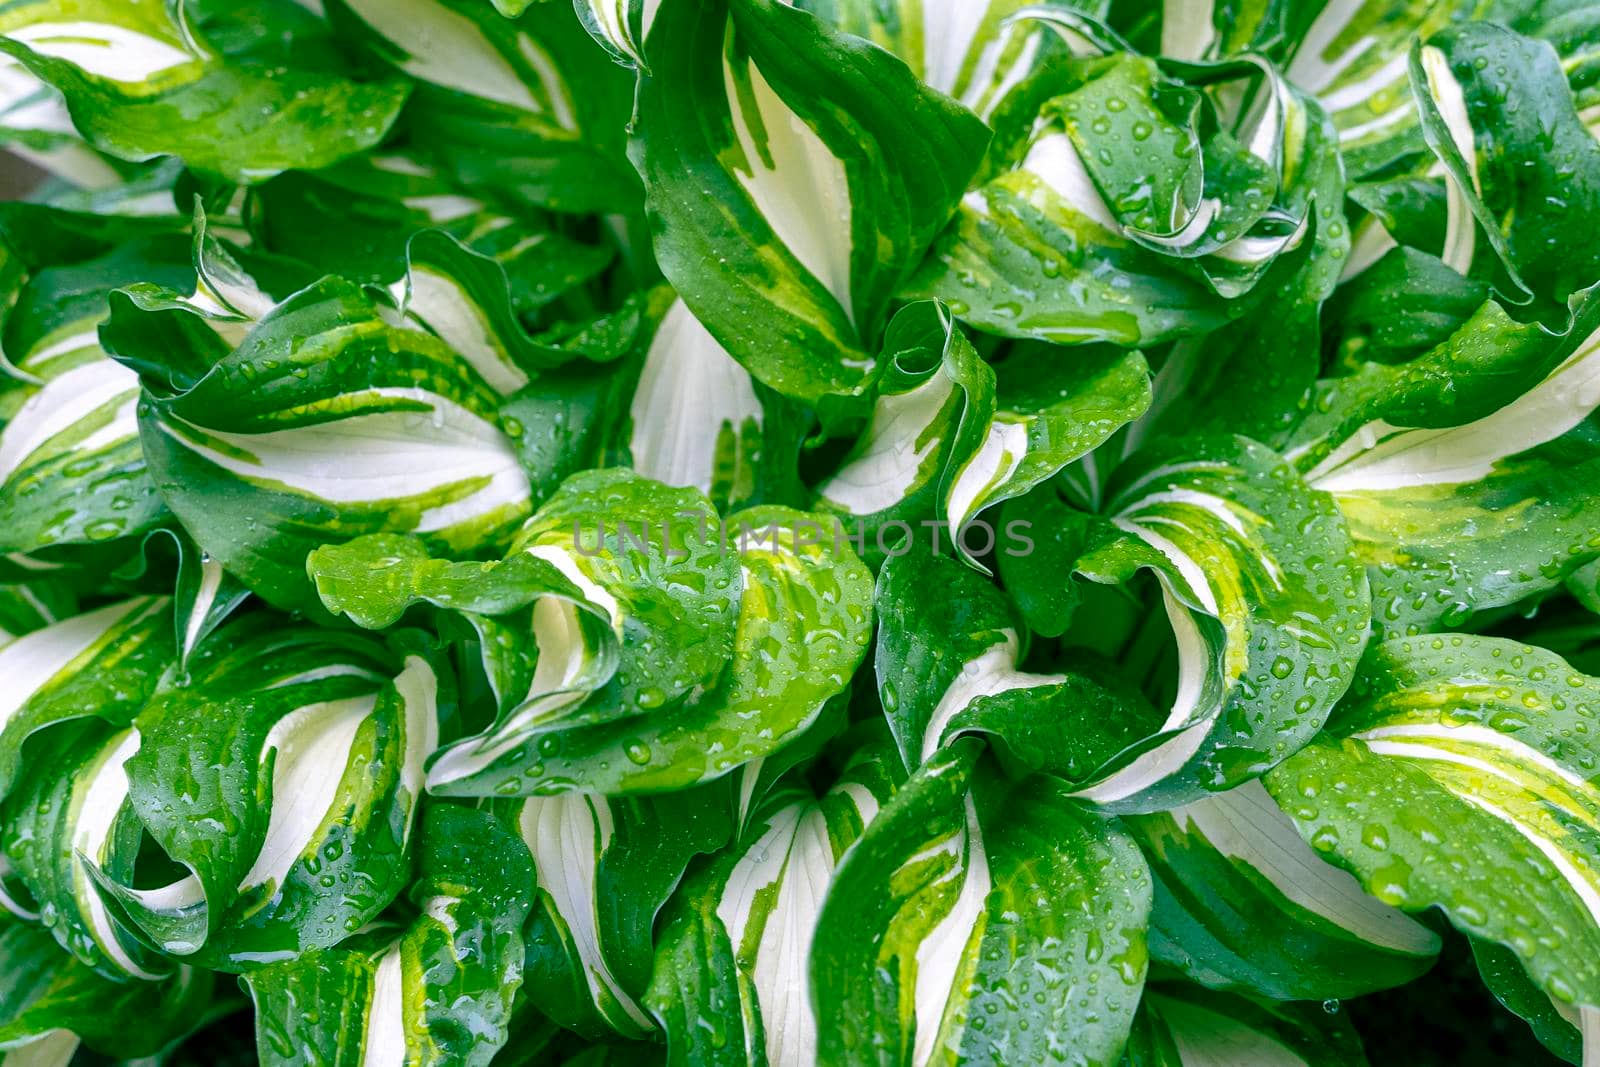 Background texture of green fresh Hosta leaves with raindrops. Natural natural background of fresh green foliage Hosts after rain.